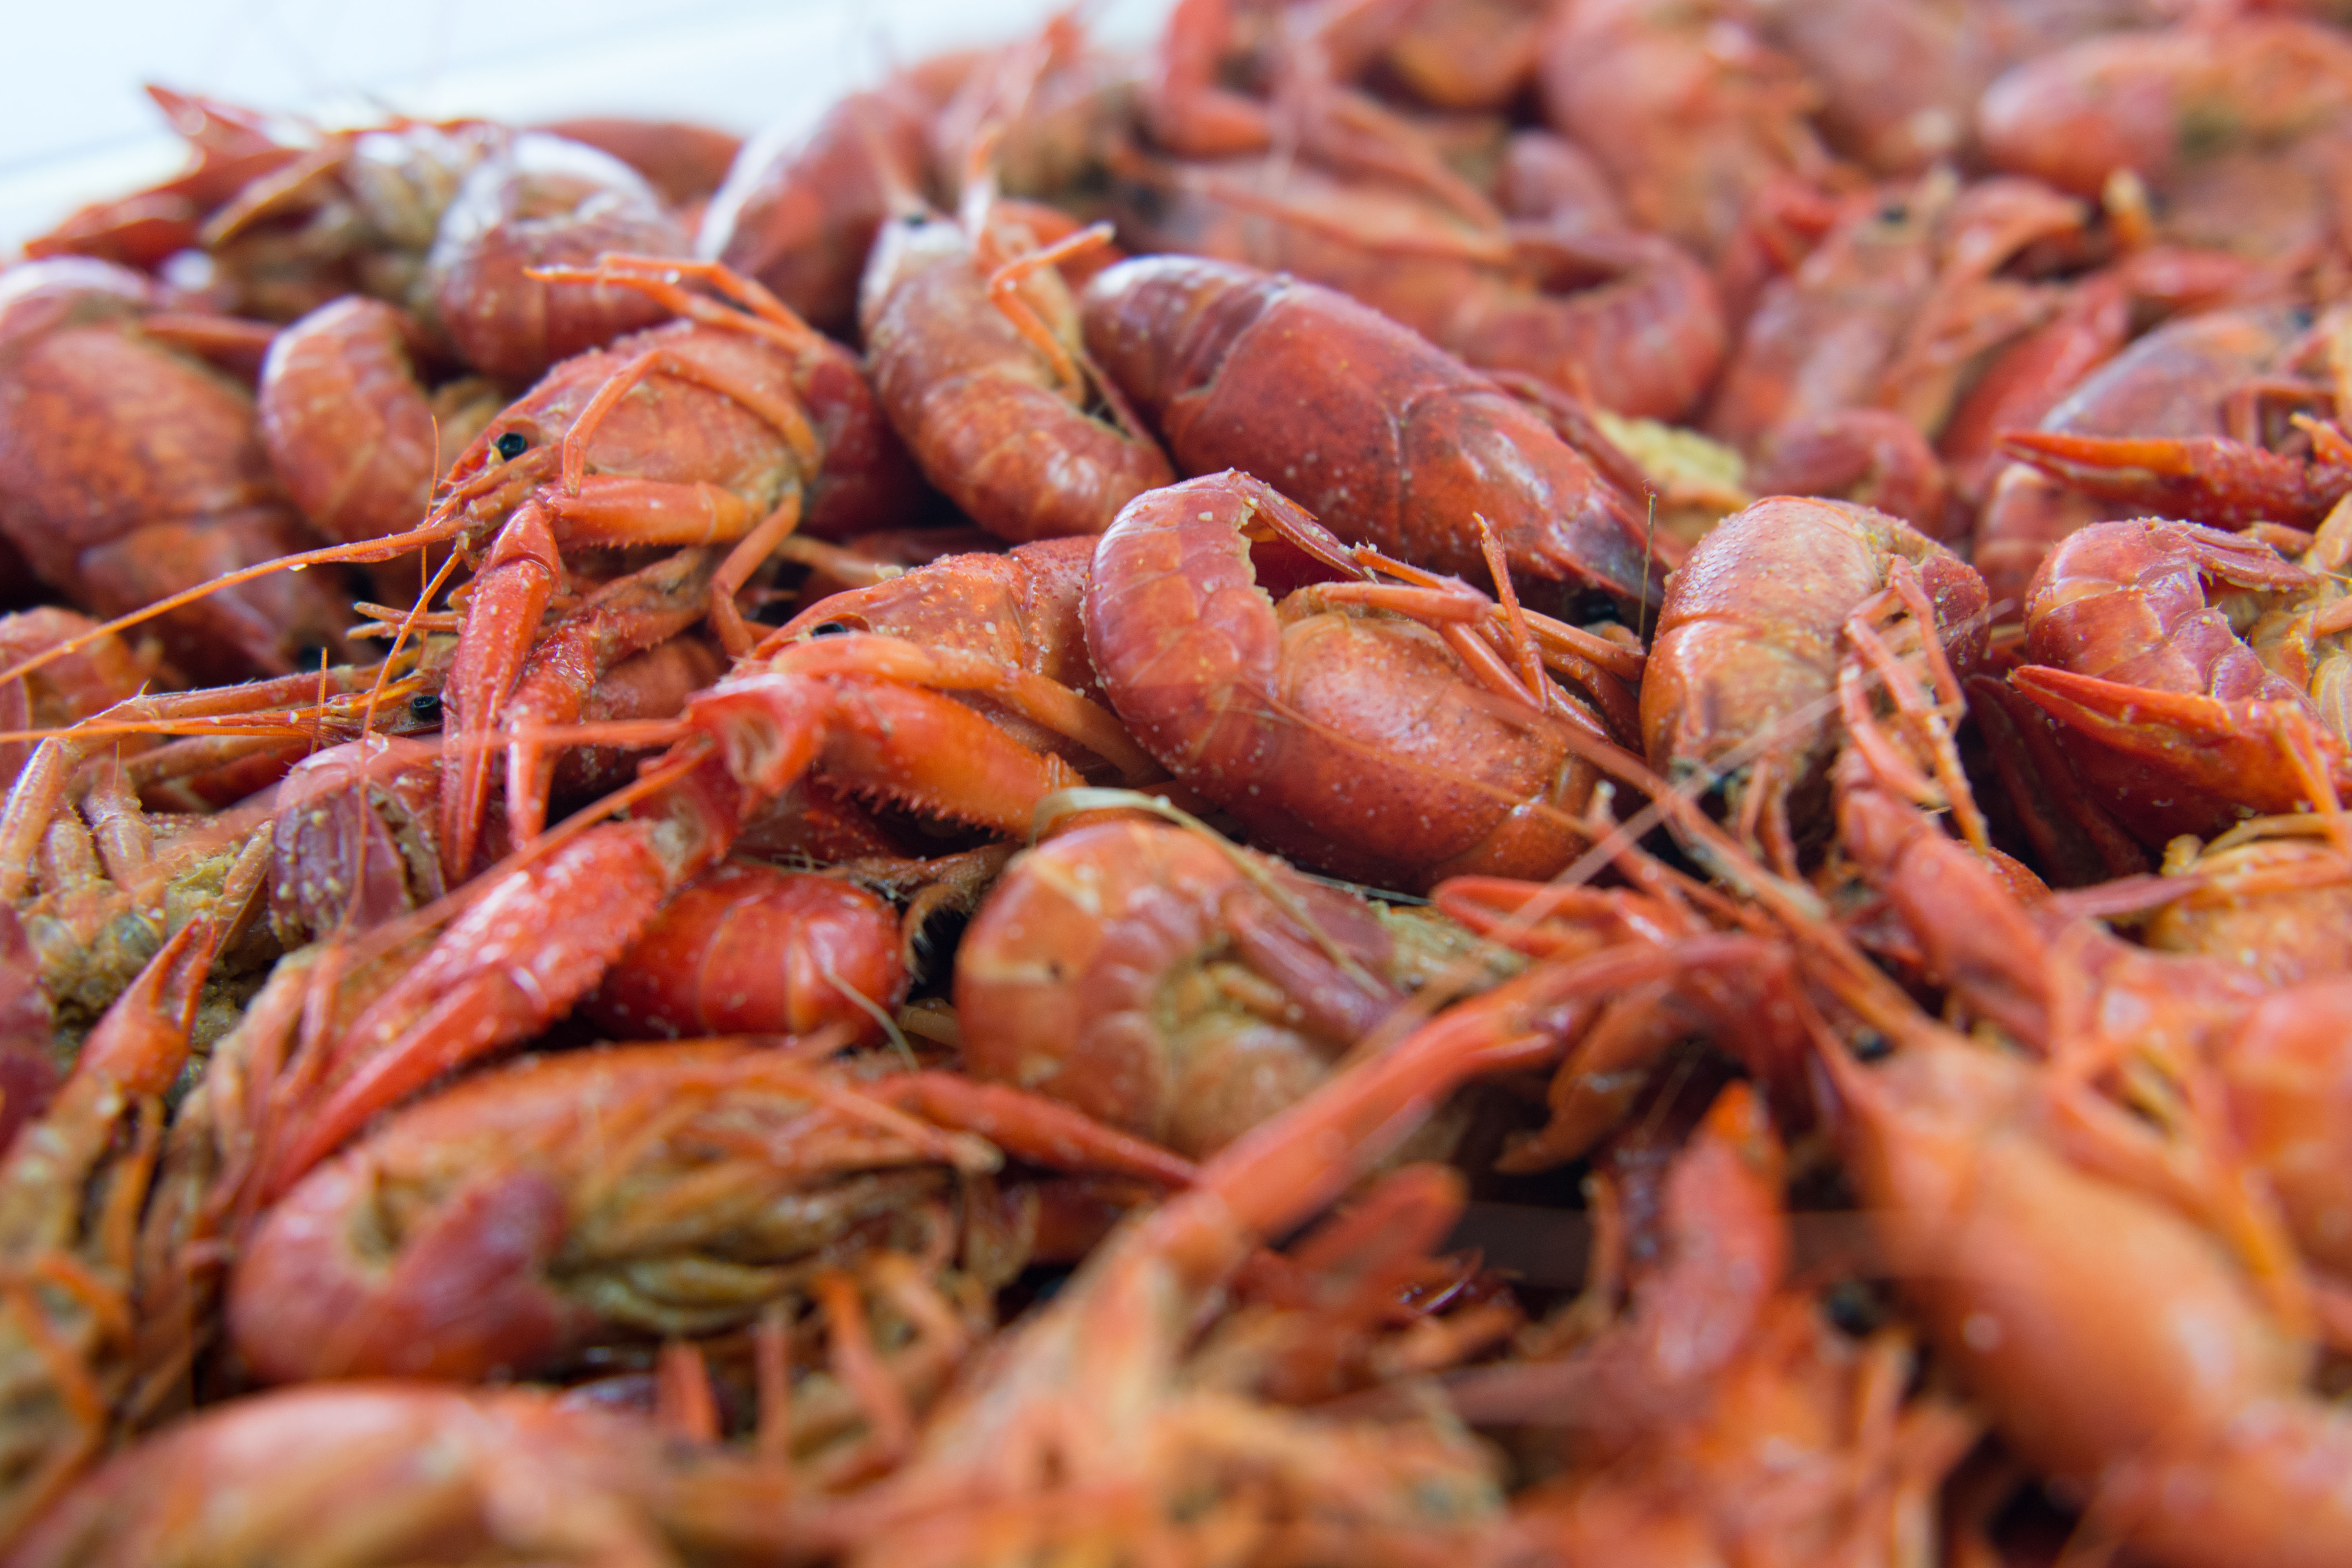 Typical NOLA style local crawfish, boiled fresh daily.